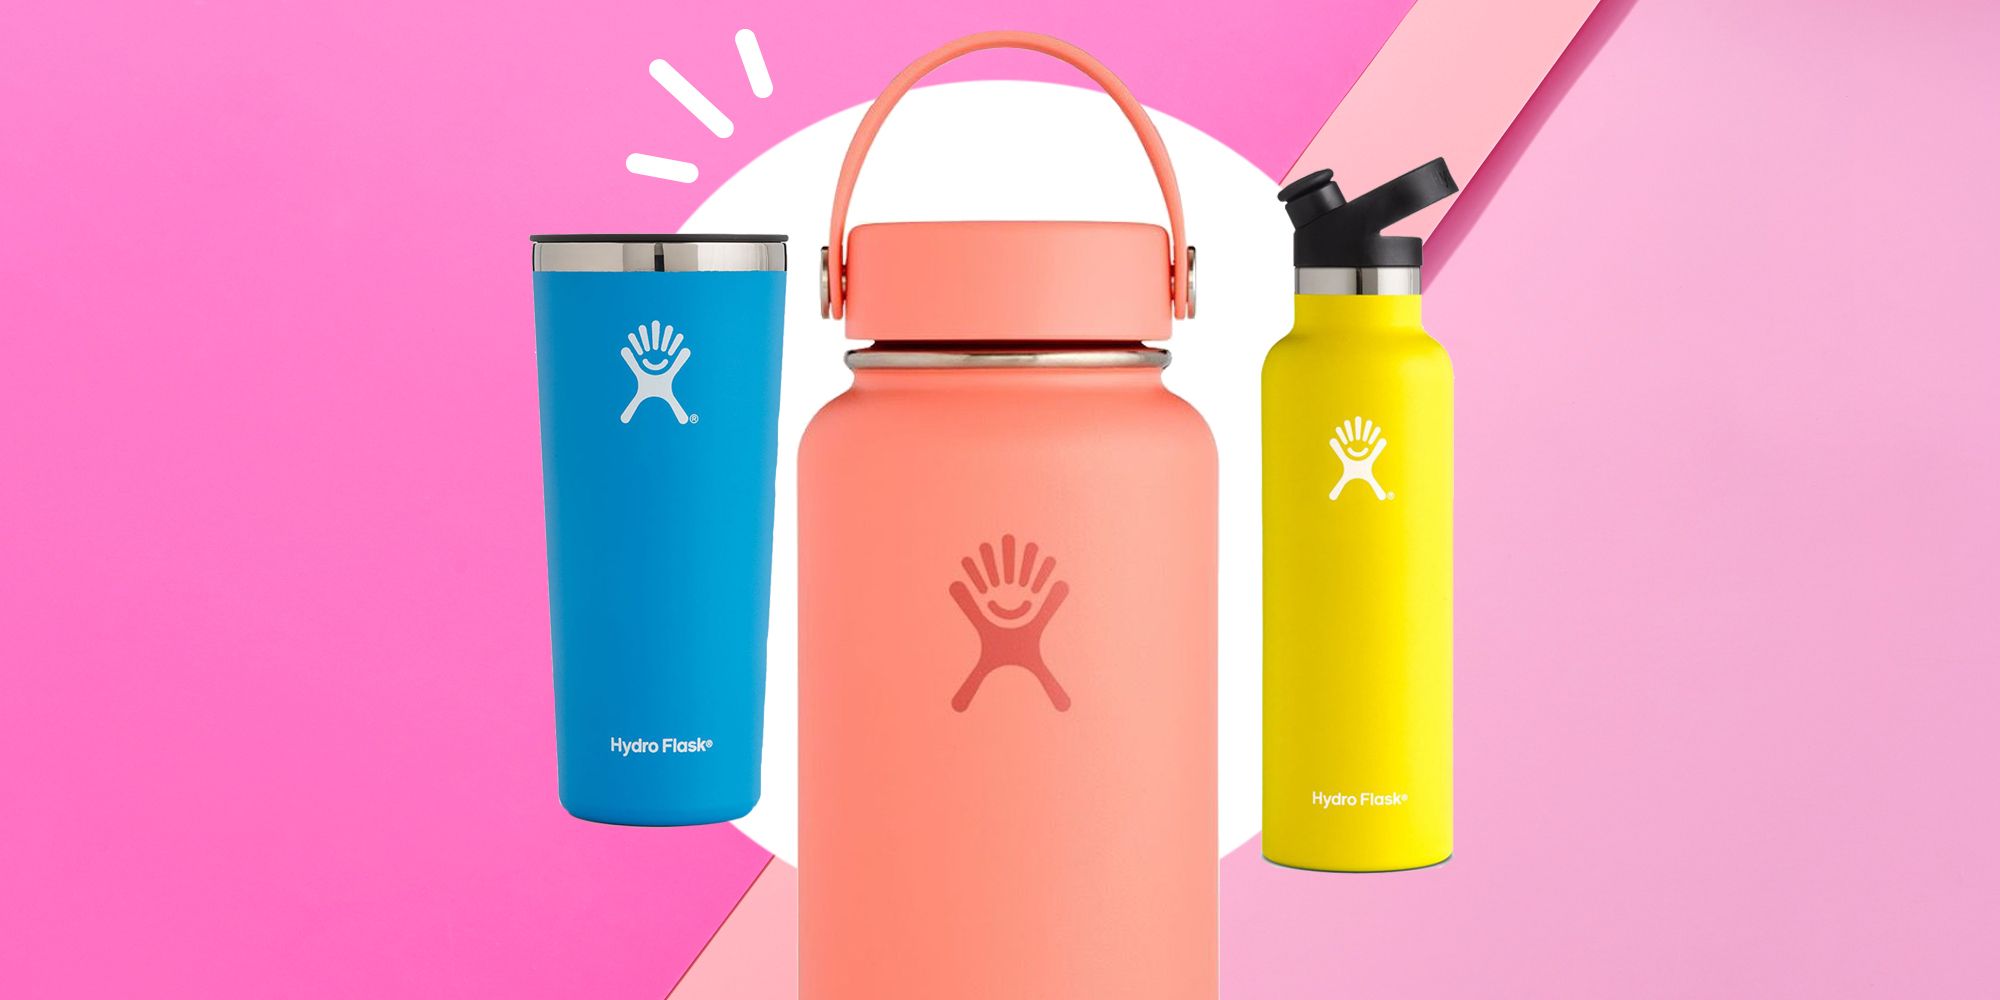 hydro flask on clearance